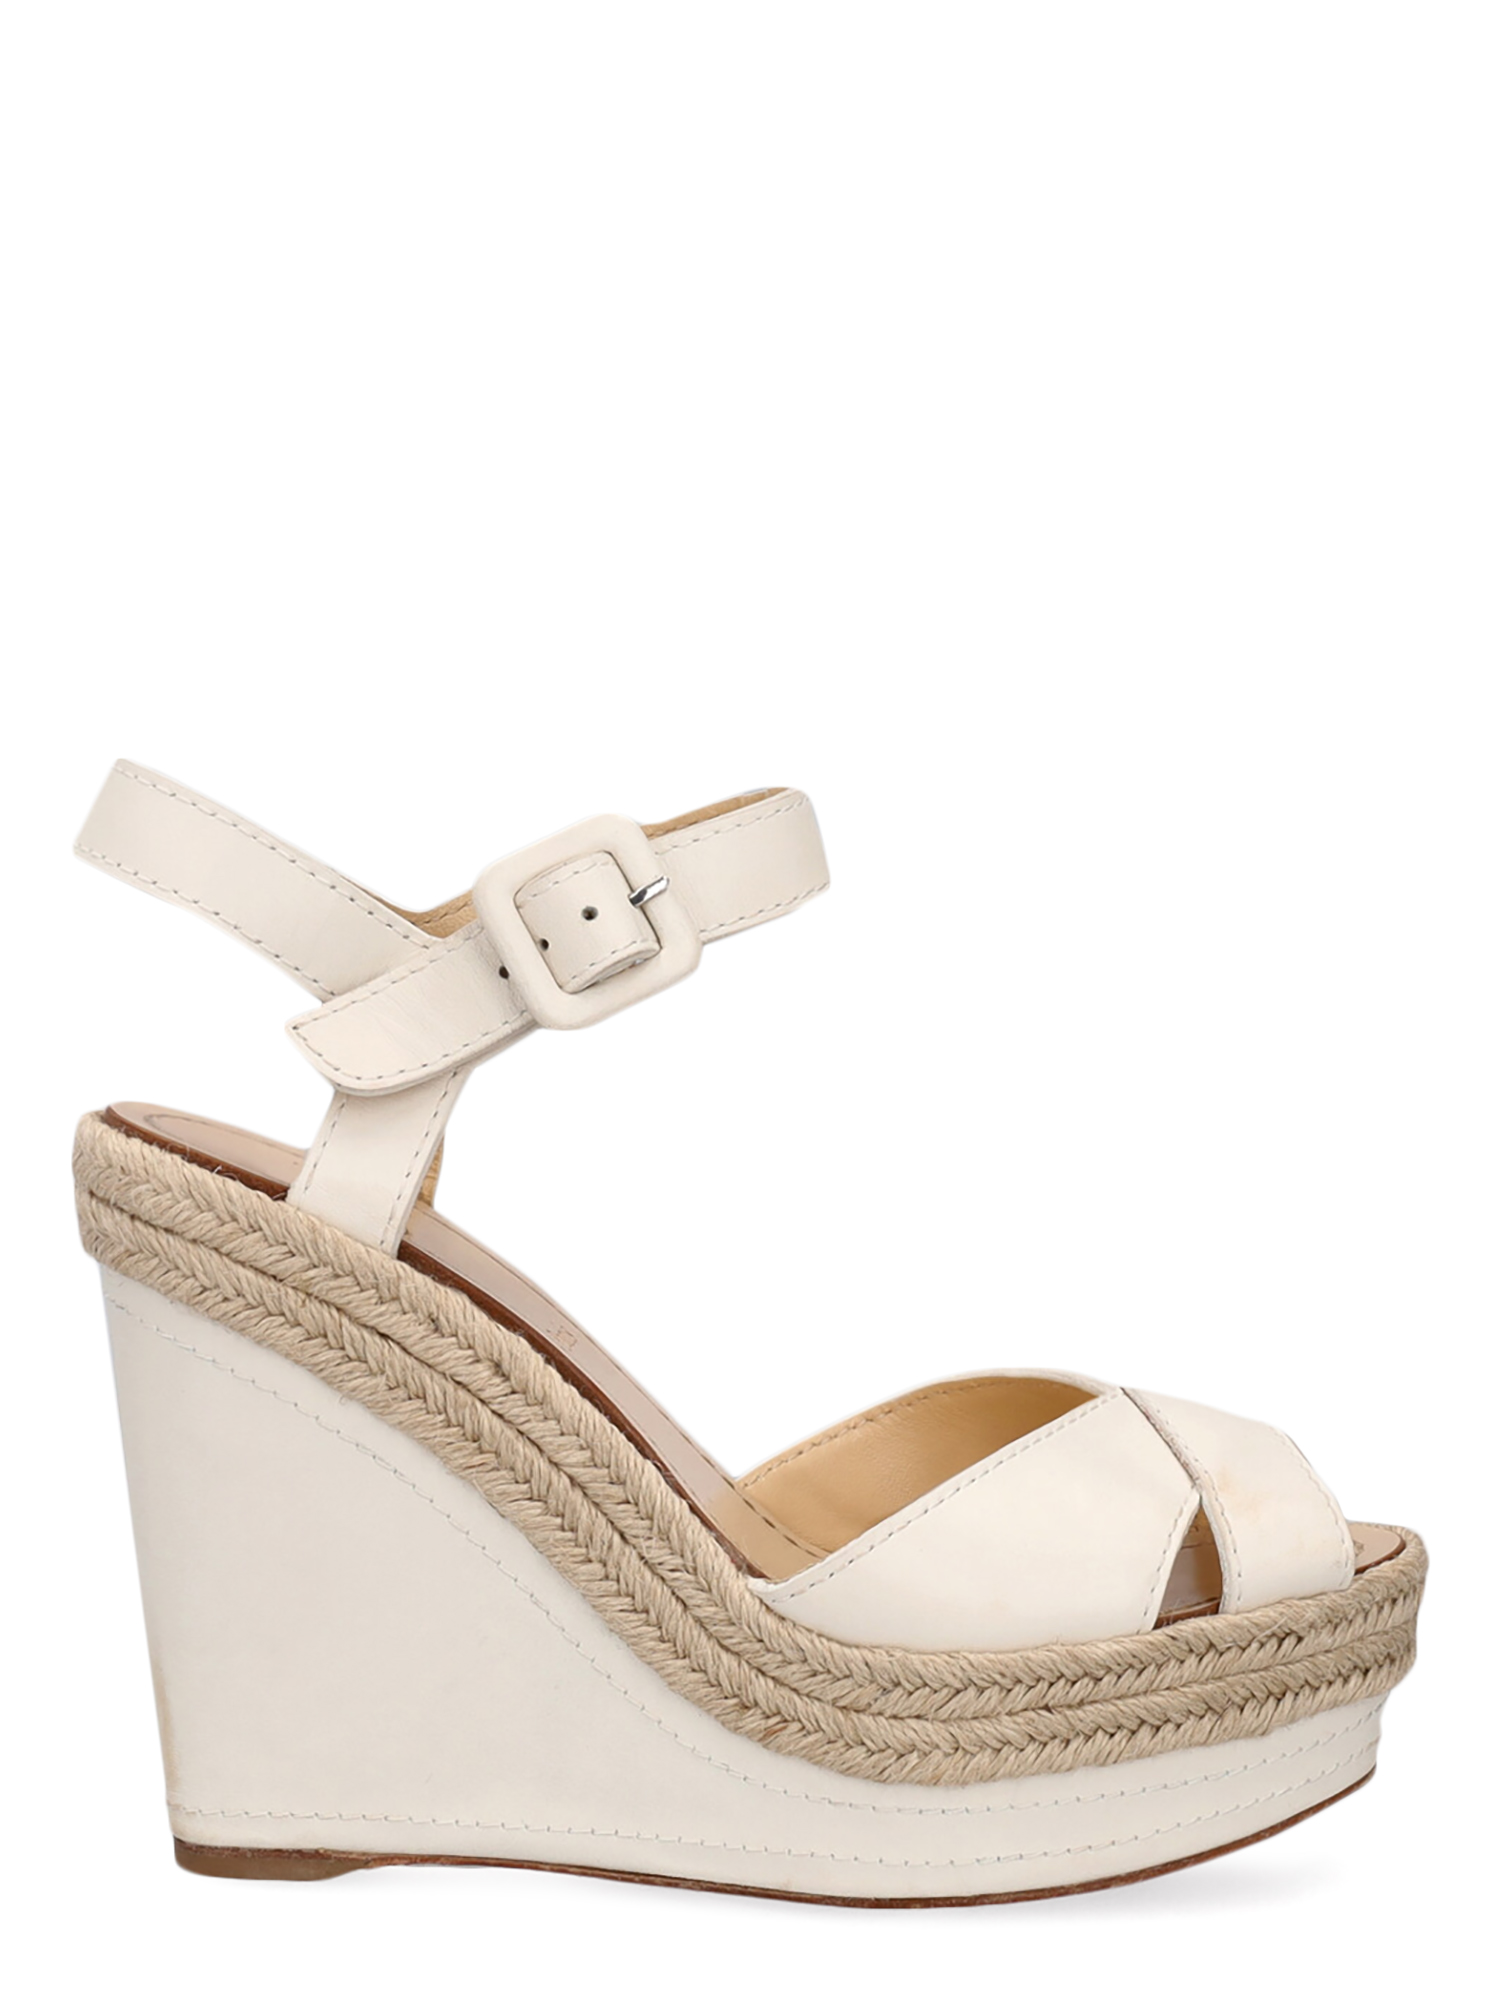 Pre-owned Christian Louboutin Women's Wedges -  - In White Leather